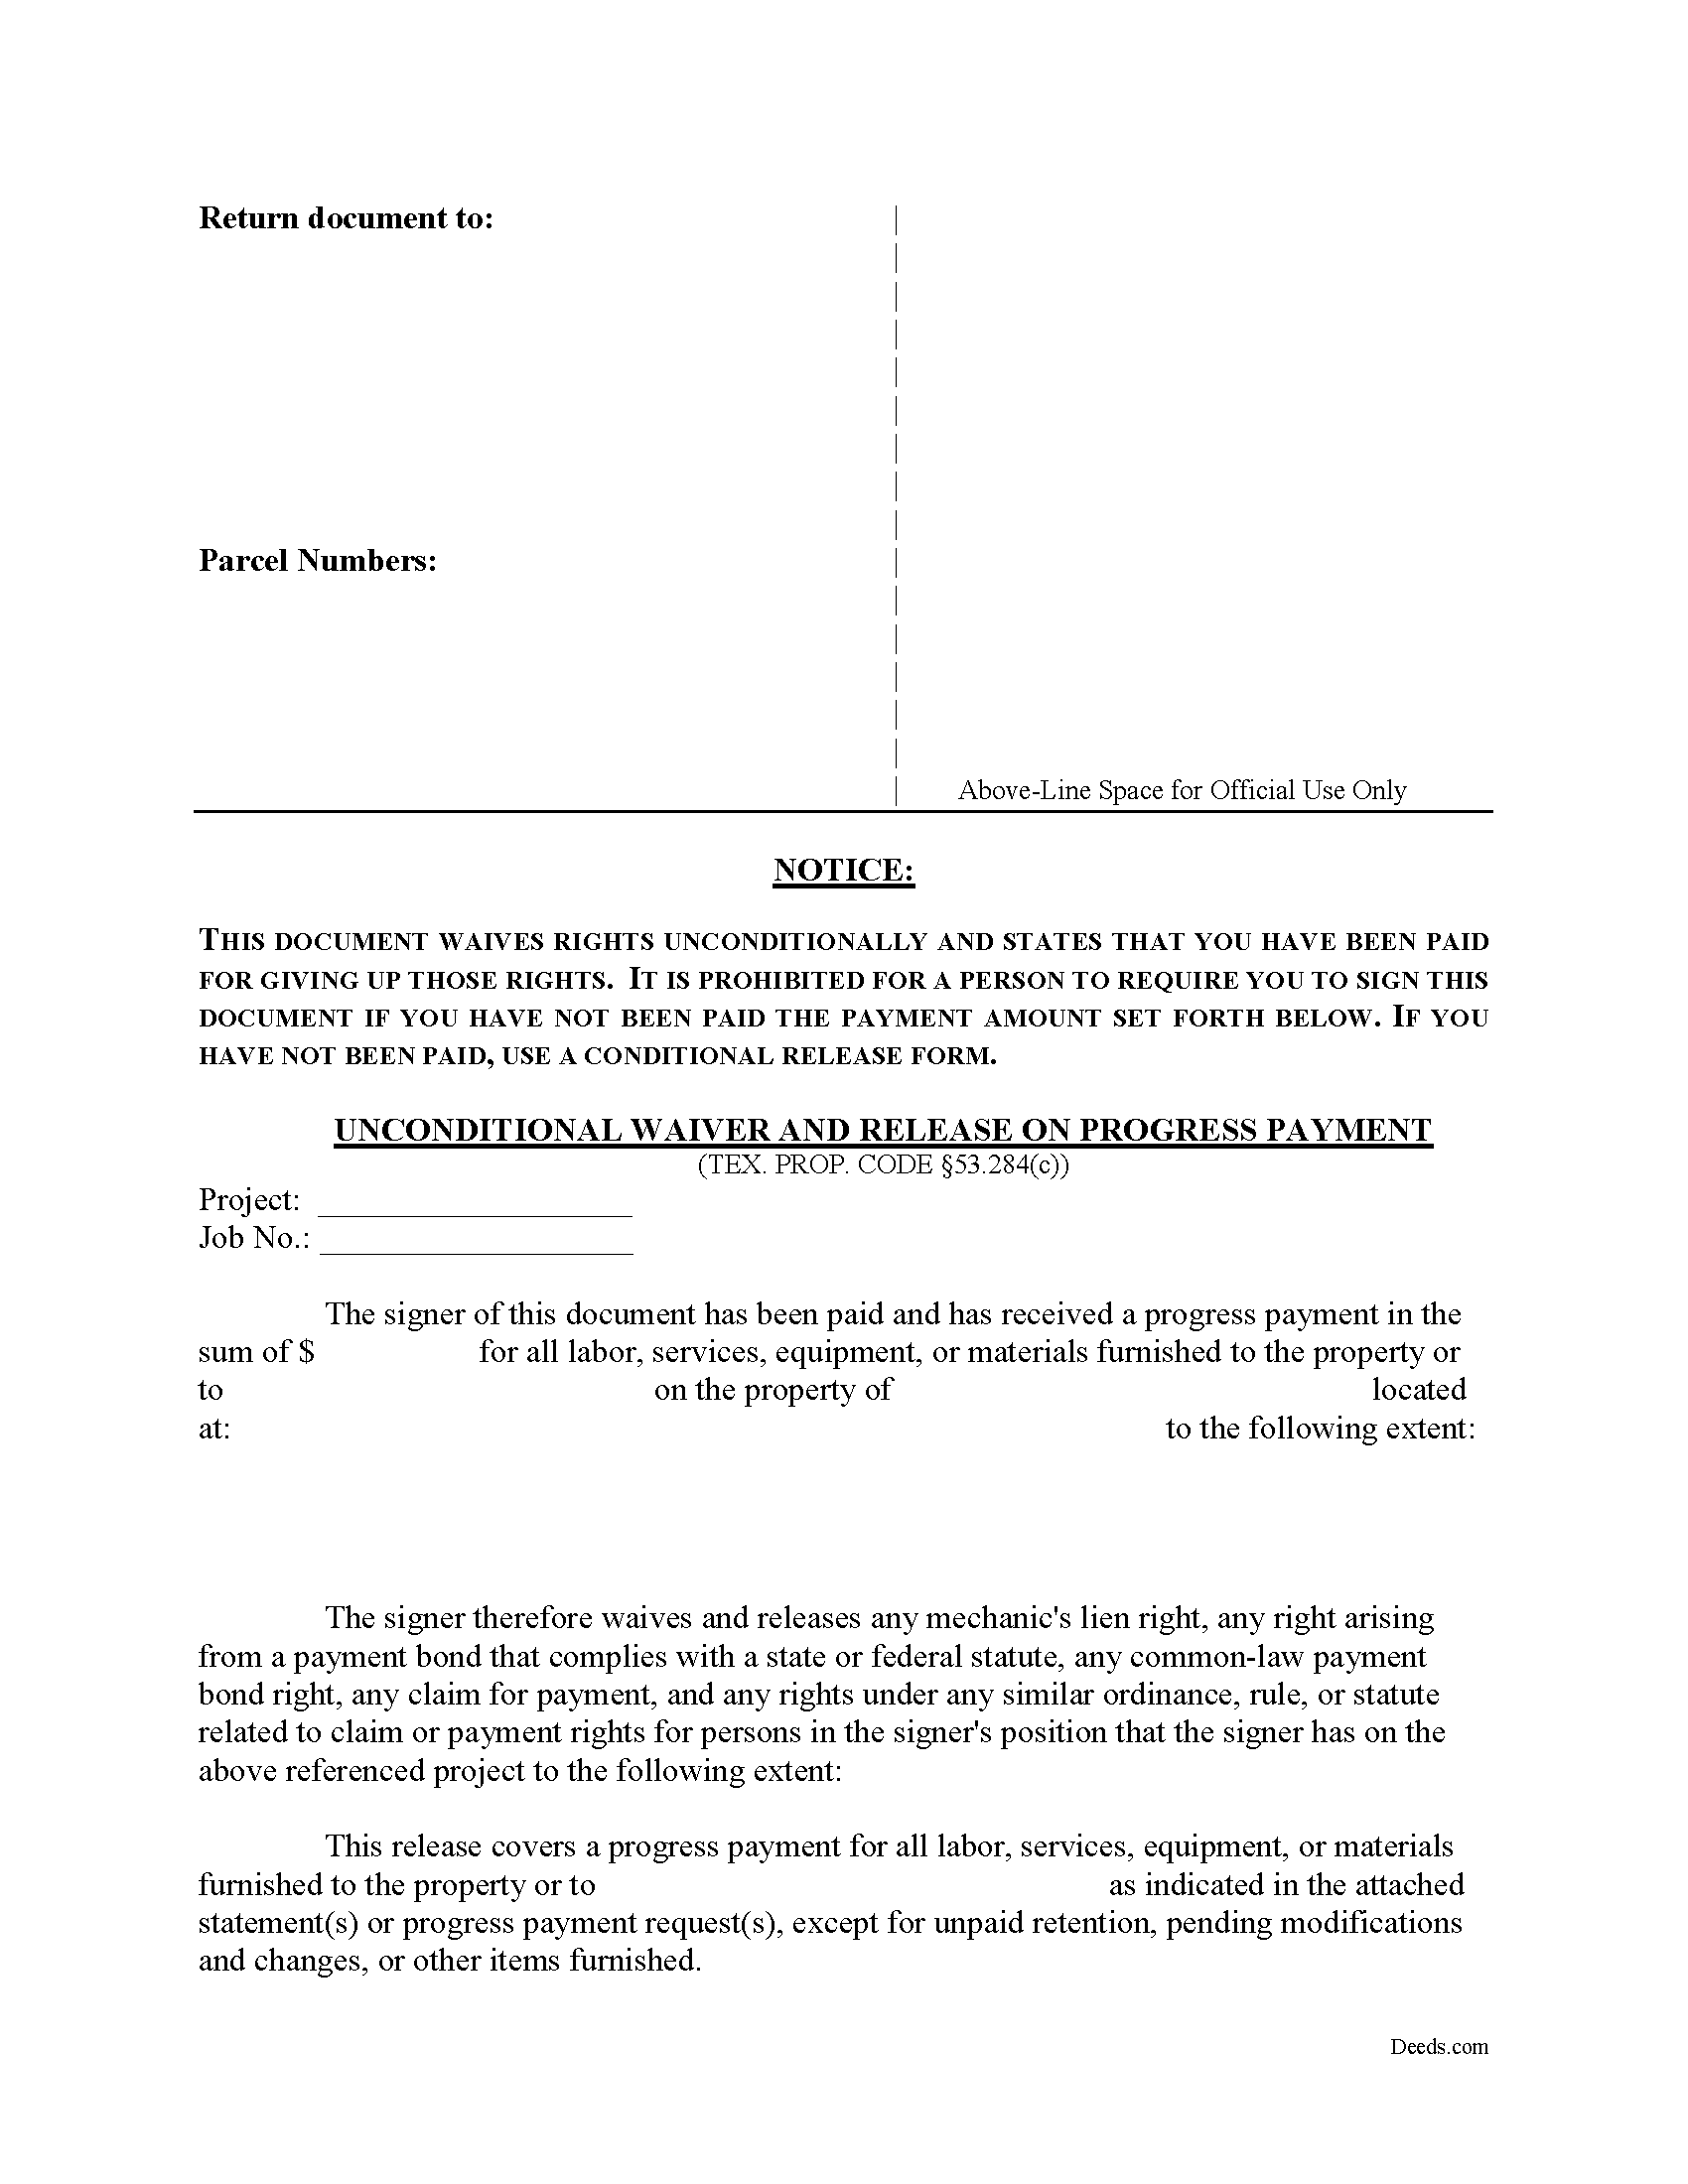 Texas Unconditional Waiver on Progress Payment Image